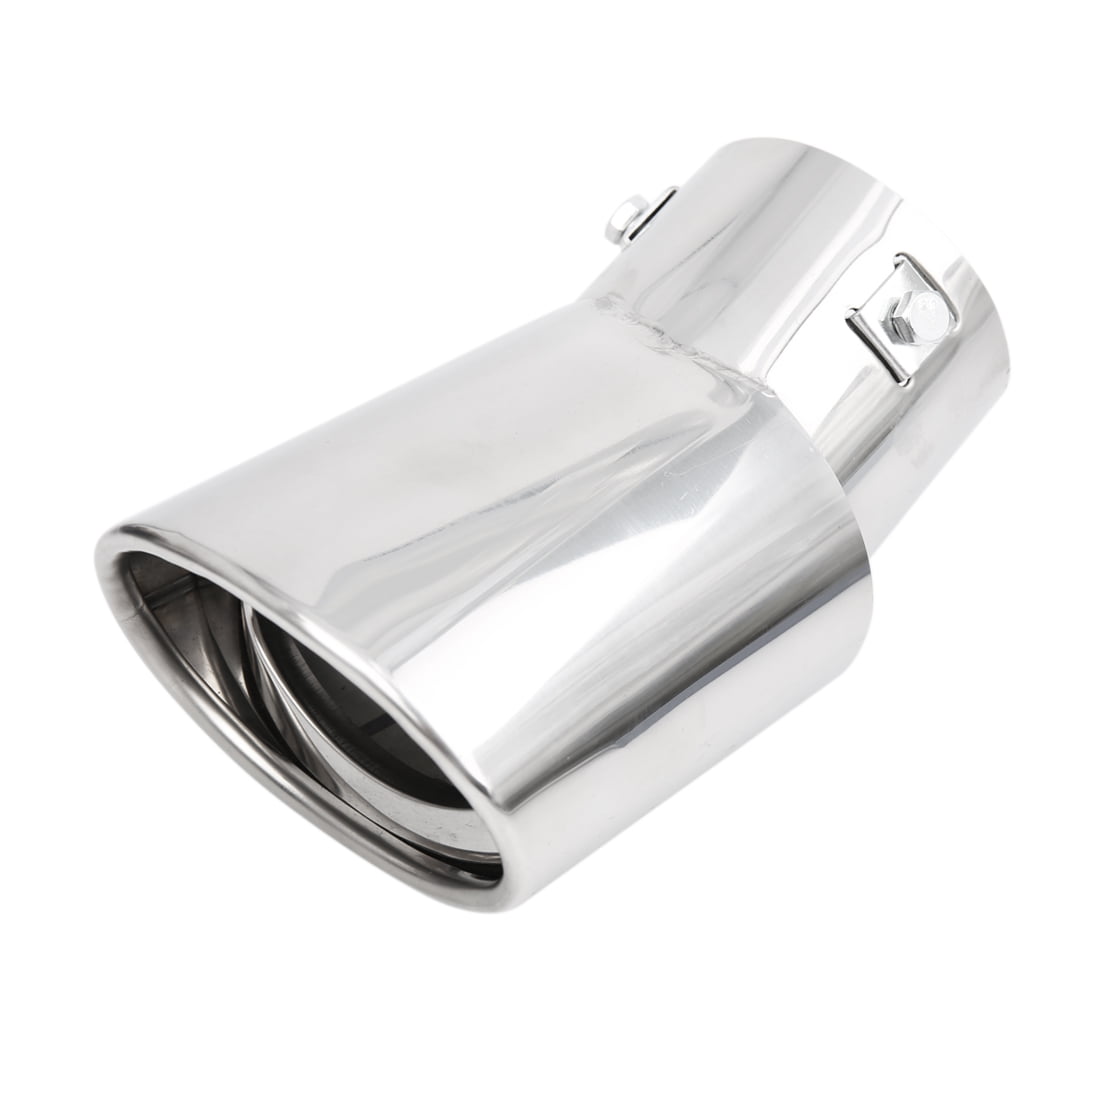 Gorgeri 63mm/2.5inch Chrome Plated Stainless Steel Exhaust Tip Pipe Muffler Modification Exhaust Muffler Blue Burnt 